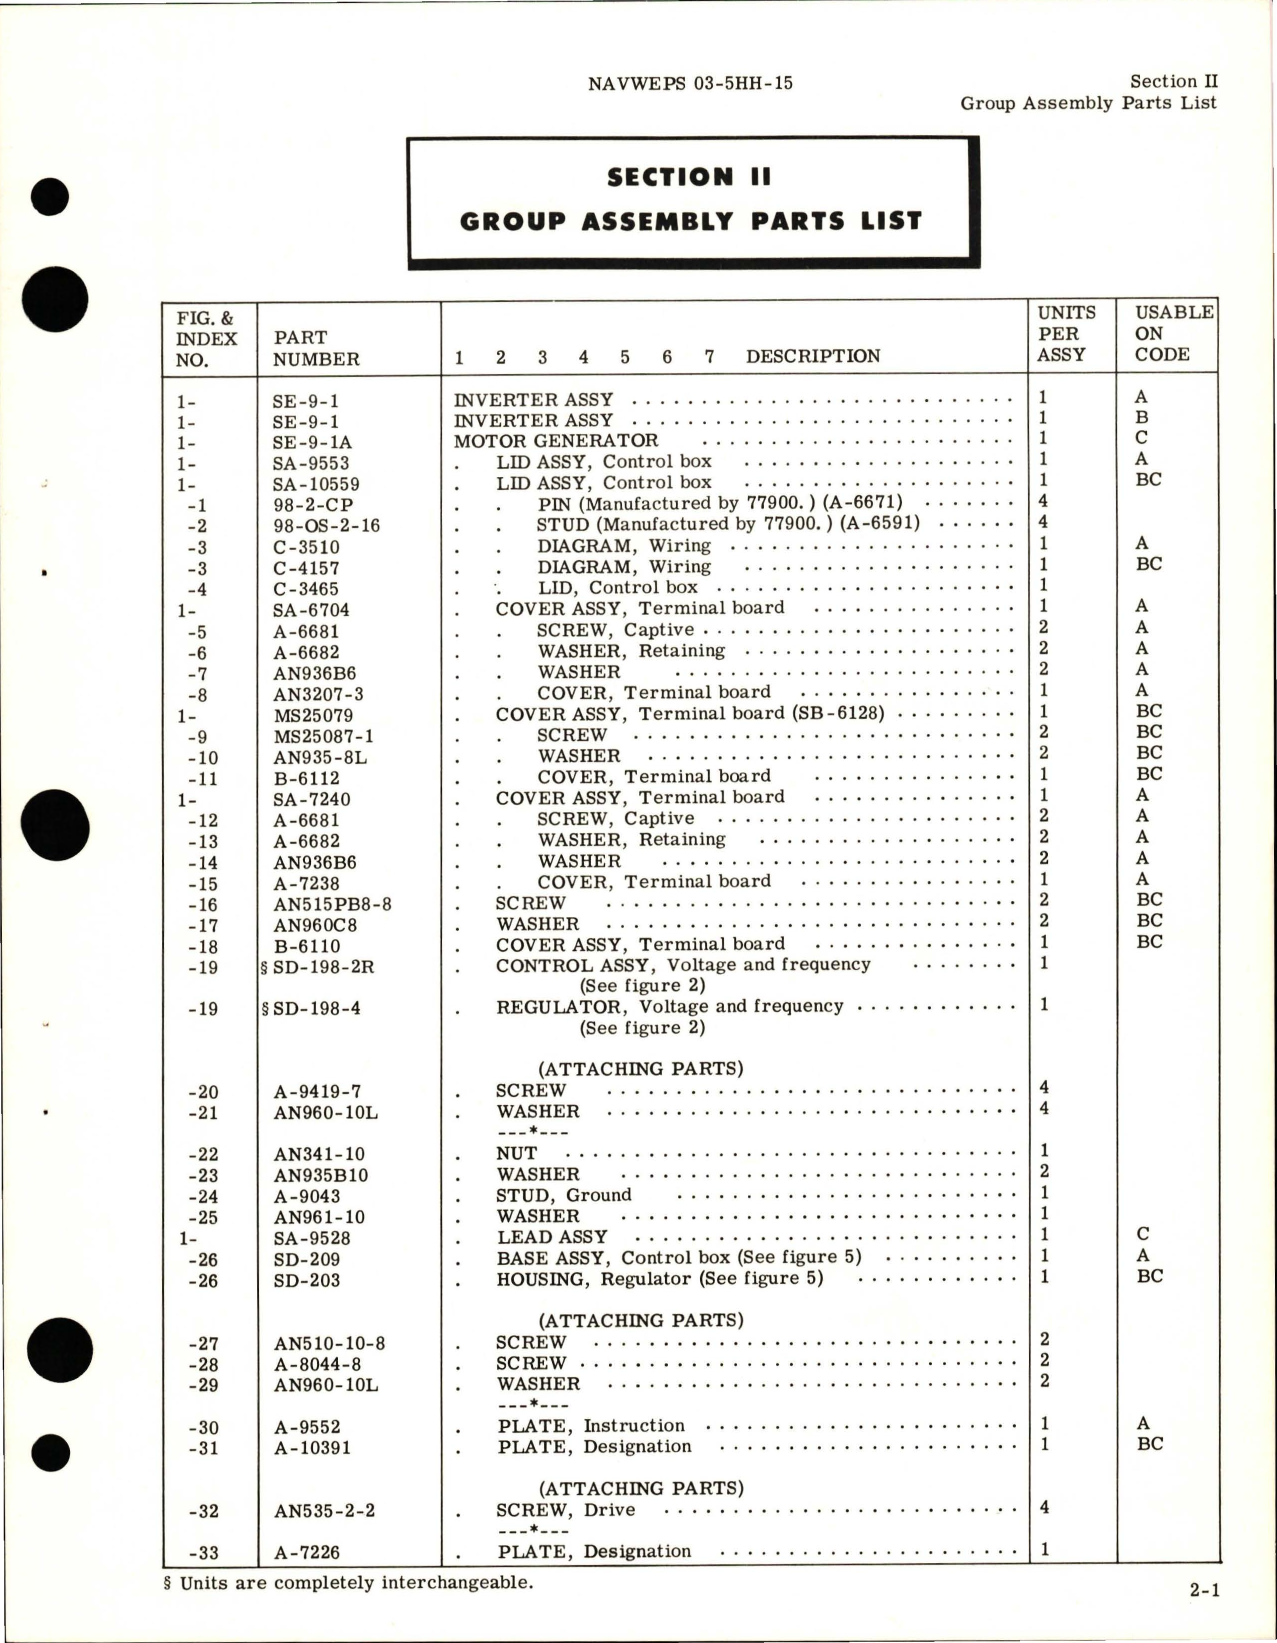 Sample page 9 from AirCorps Library document: Illustrated Parts Breakdown for Inverter - Part SE-9-1, and Motor Generator Part SE-9-1A